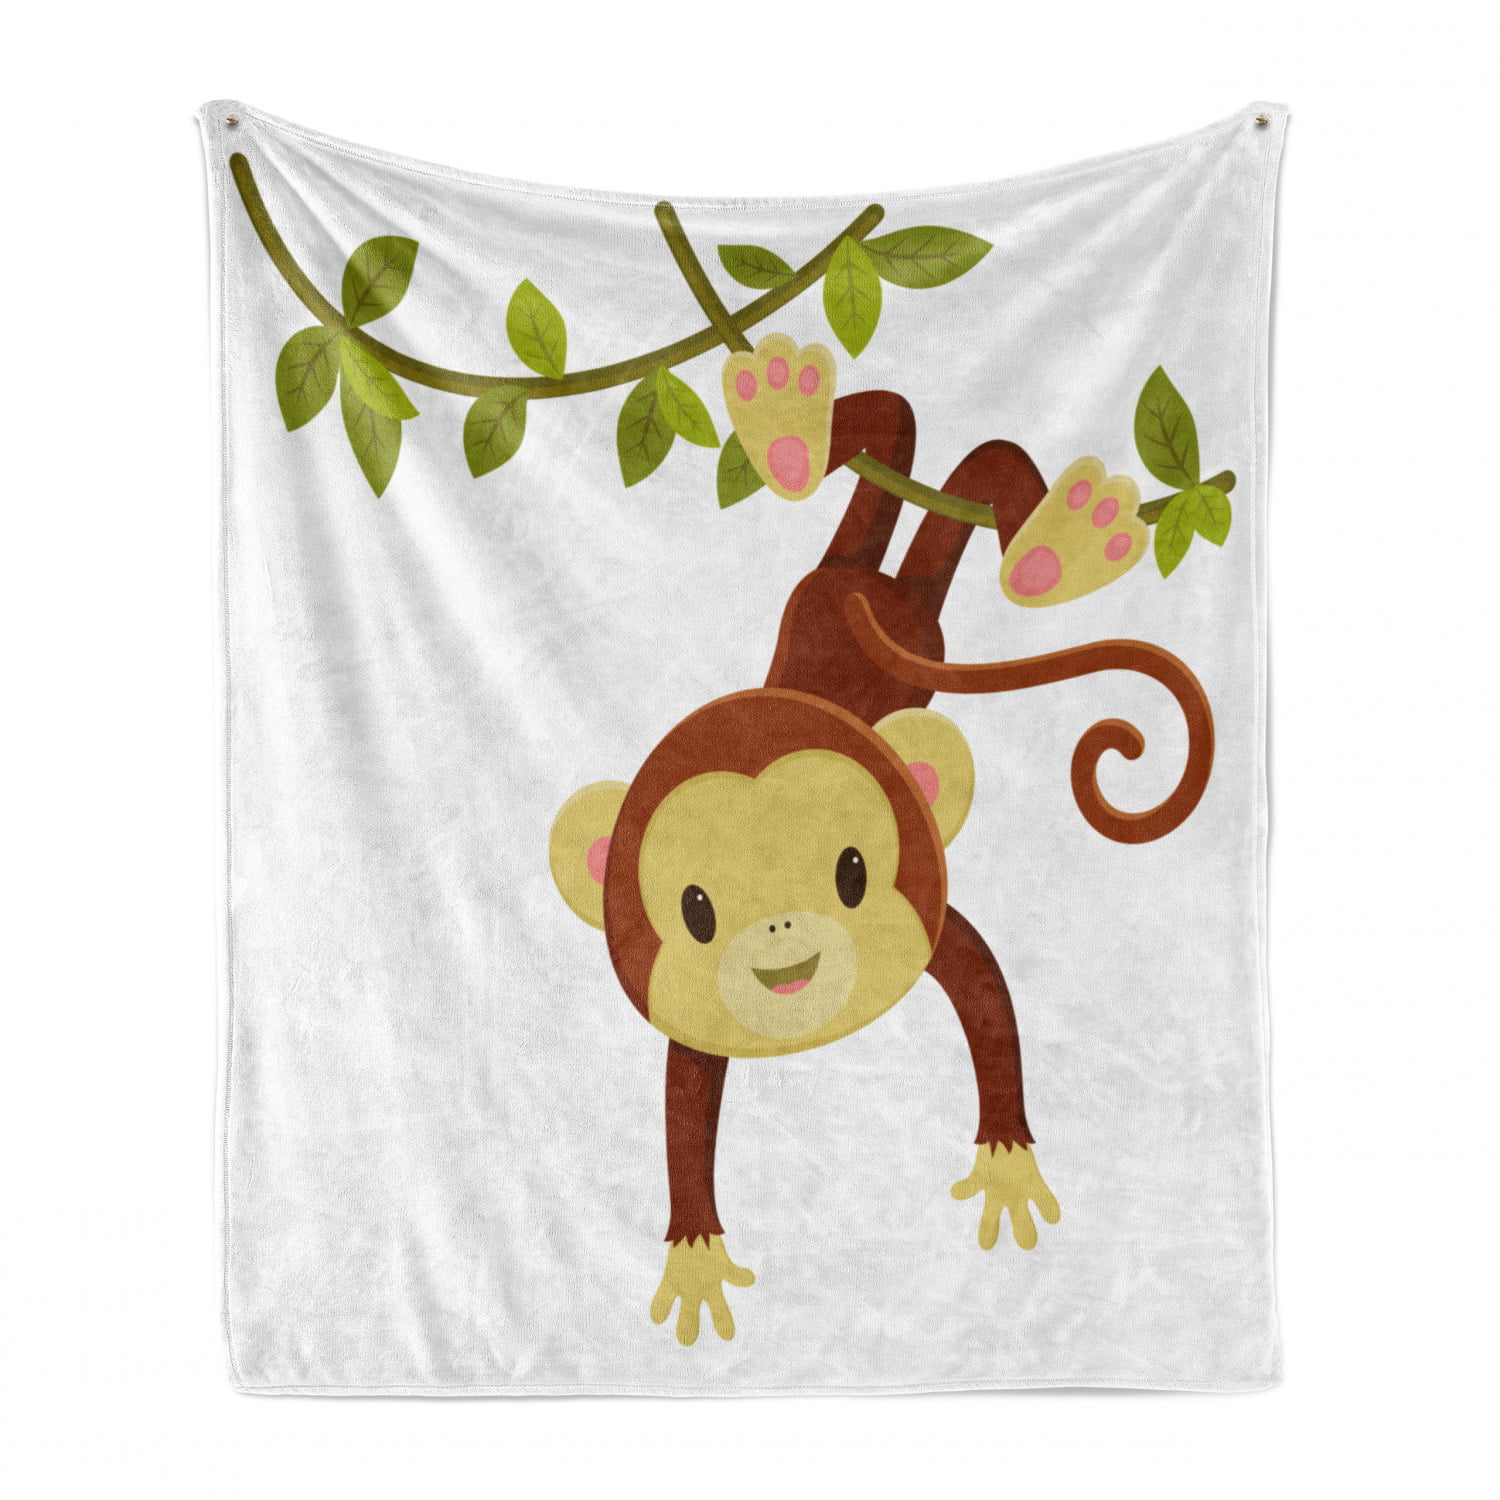 Cozy Plush for Indoor and Outdoor Use Brown Green Pink 50 x 60 Ambesonne Cartoon Soft Flannel Fleece Throw Blanket Monkey Hanging on Liana Playful Safari Character Mascot 